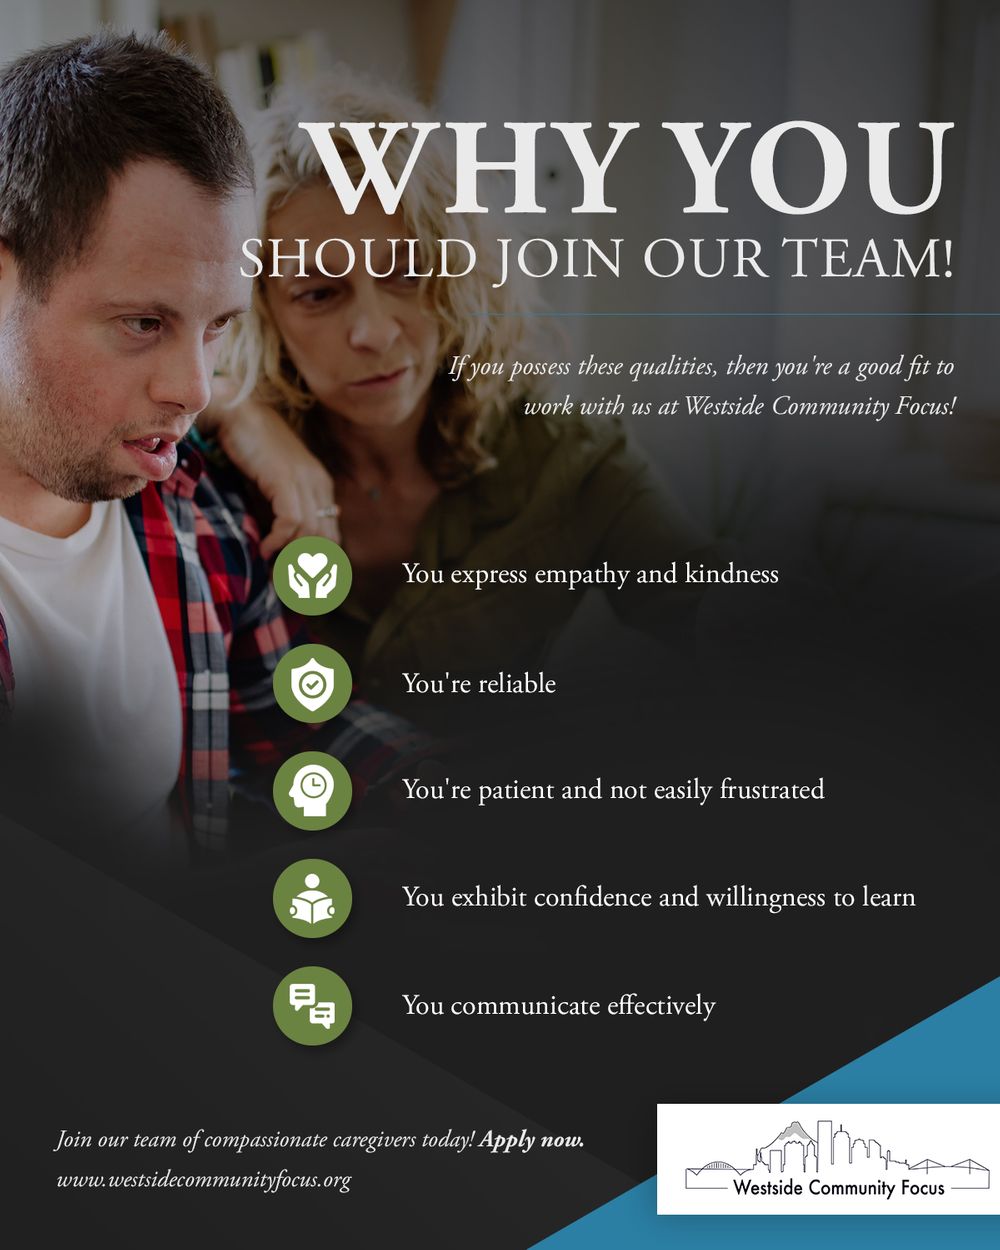 Why-You-Should-Join-Our-Team-Infographic.jpg